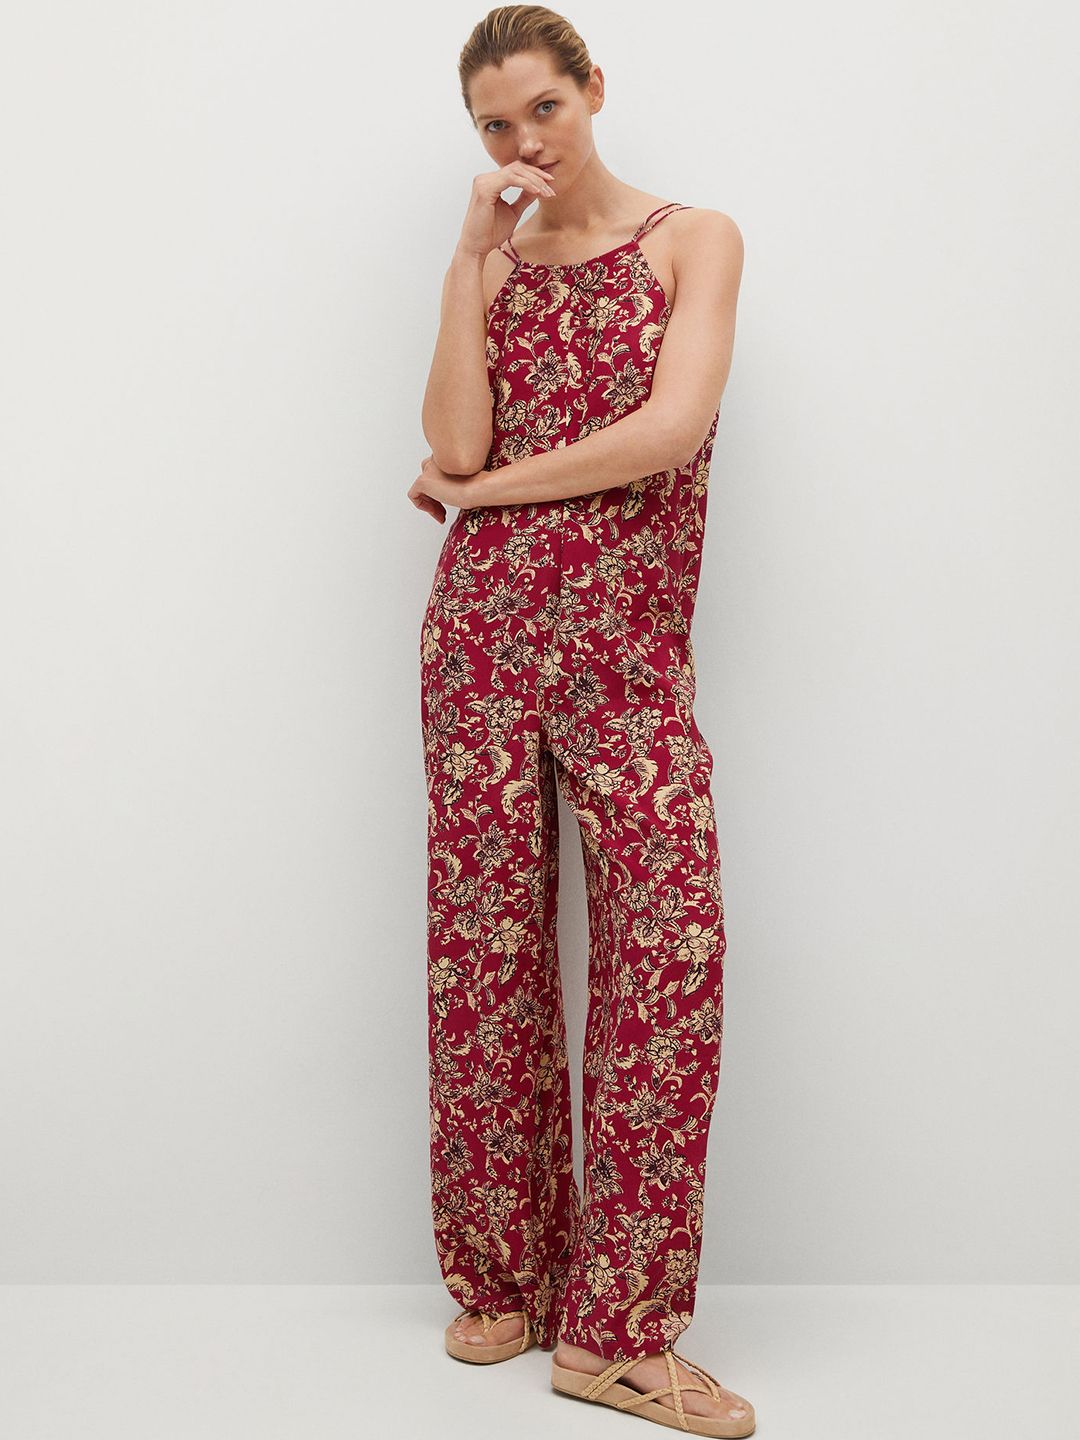 MANGO Maroon & Beige Floral Printed Styled Back Basic Jumpsuit Price in India